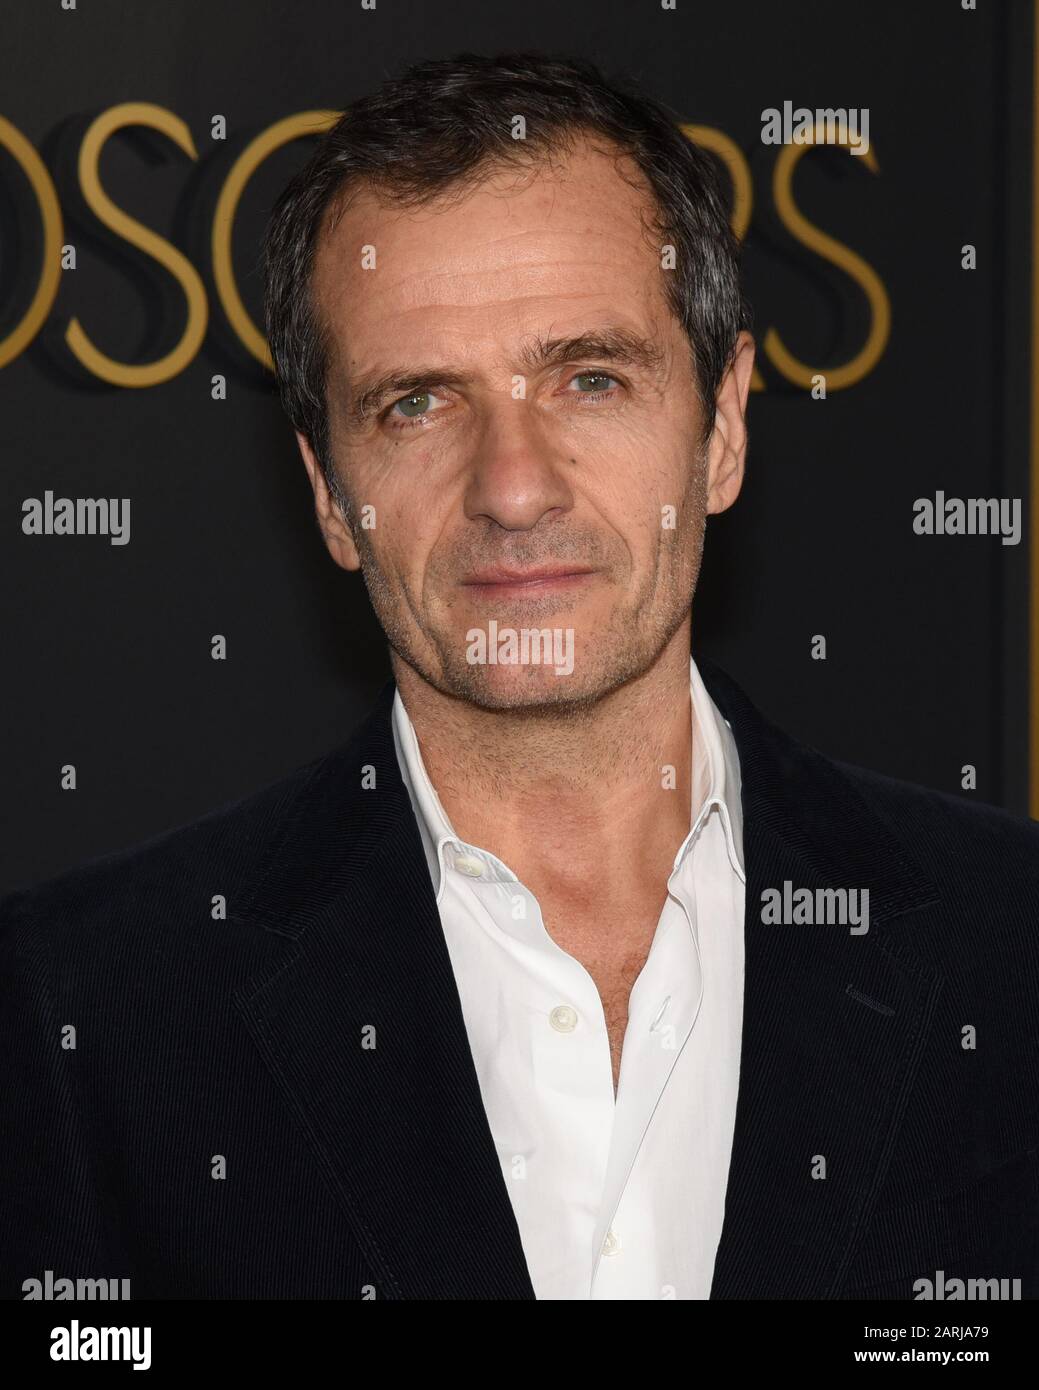 January 27, 2020, Hollywood, California, USA: attends the 92nd Oscars Nominees Luncheon at the Ray Dolby Ballroom. (Credit Image: © Billy Bennight/ZUMA Wire) Stock Photo